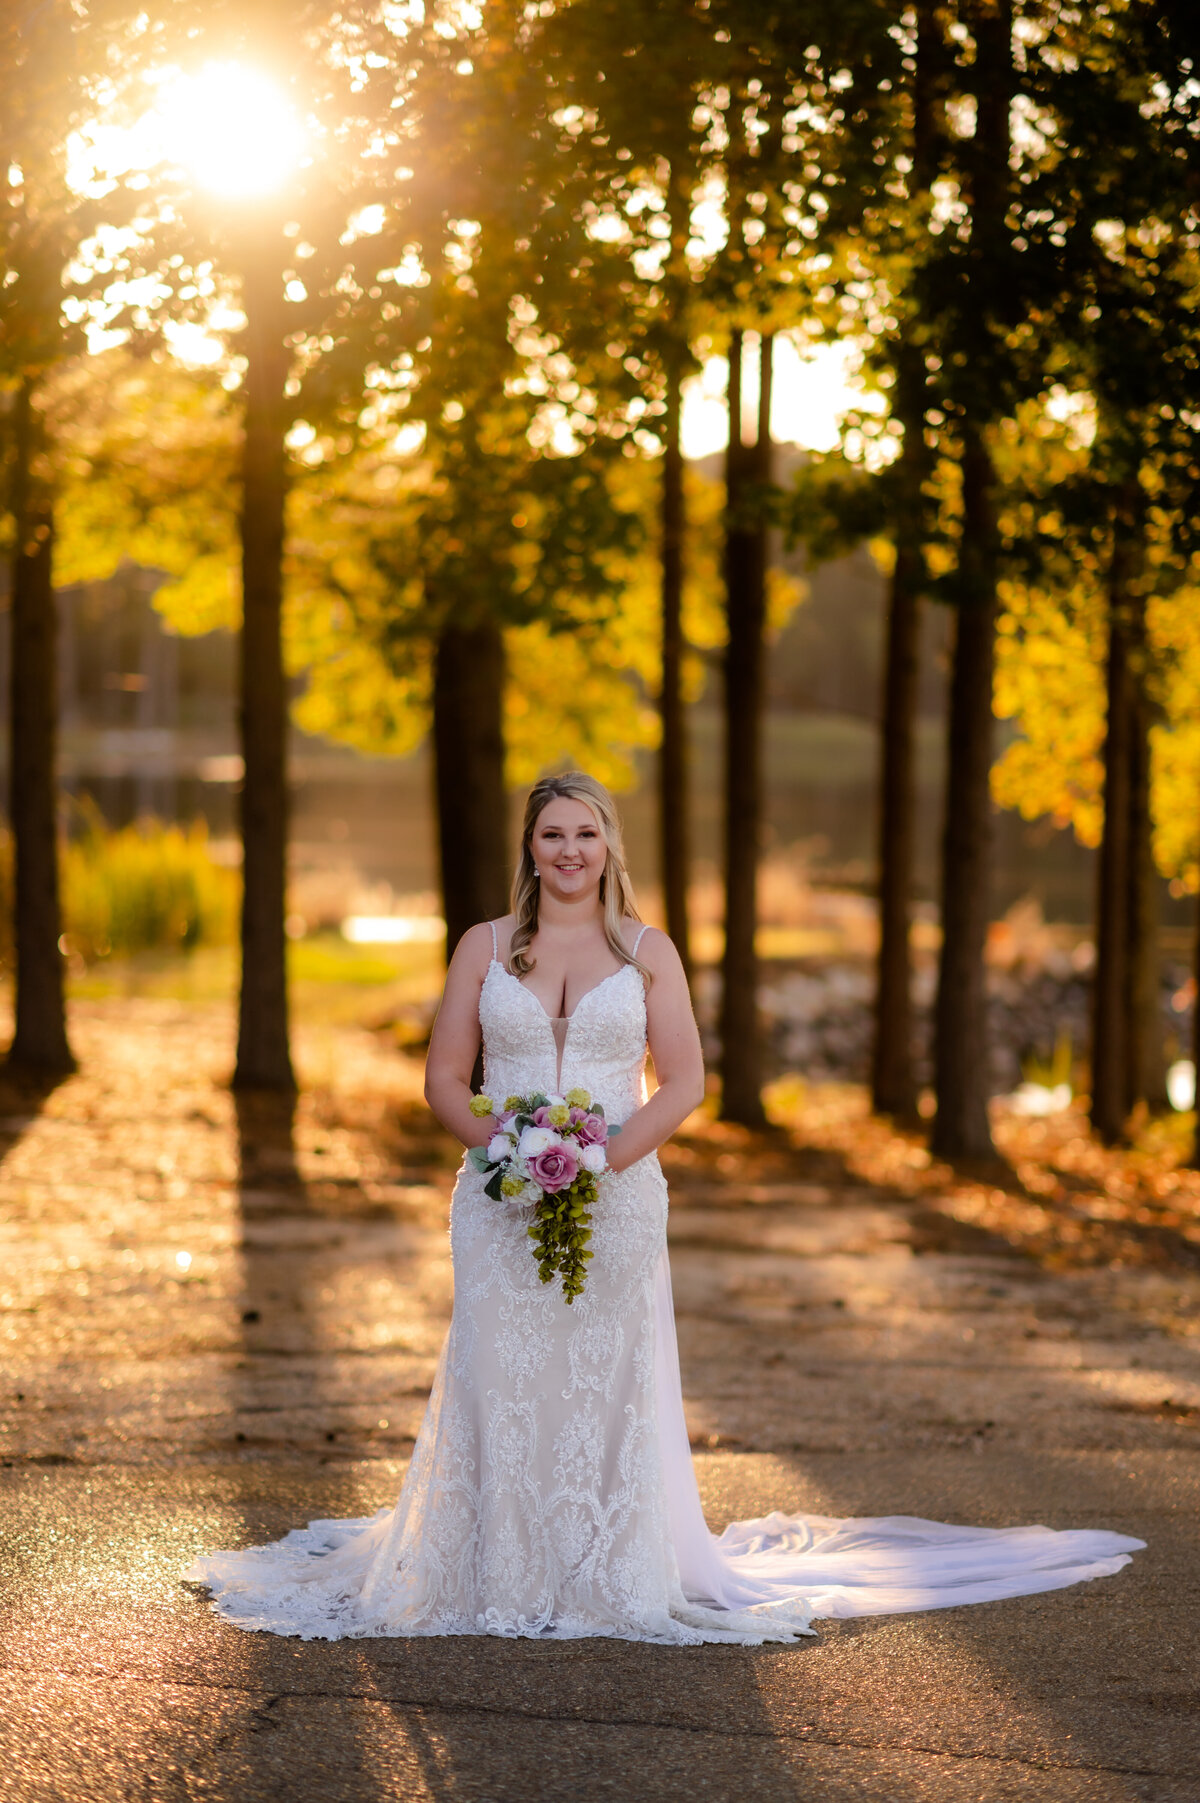 woodland wedding in the fall with bride holding a small floral bouquet in front of her while smiling at the camera with the golden sun setting behind her